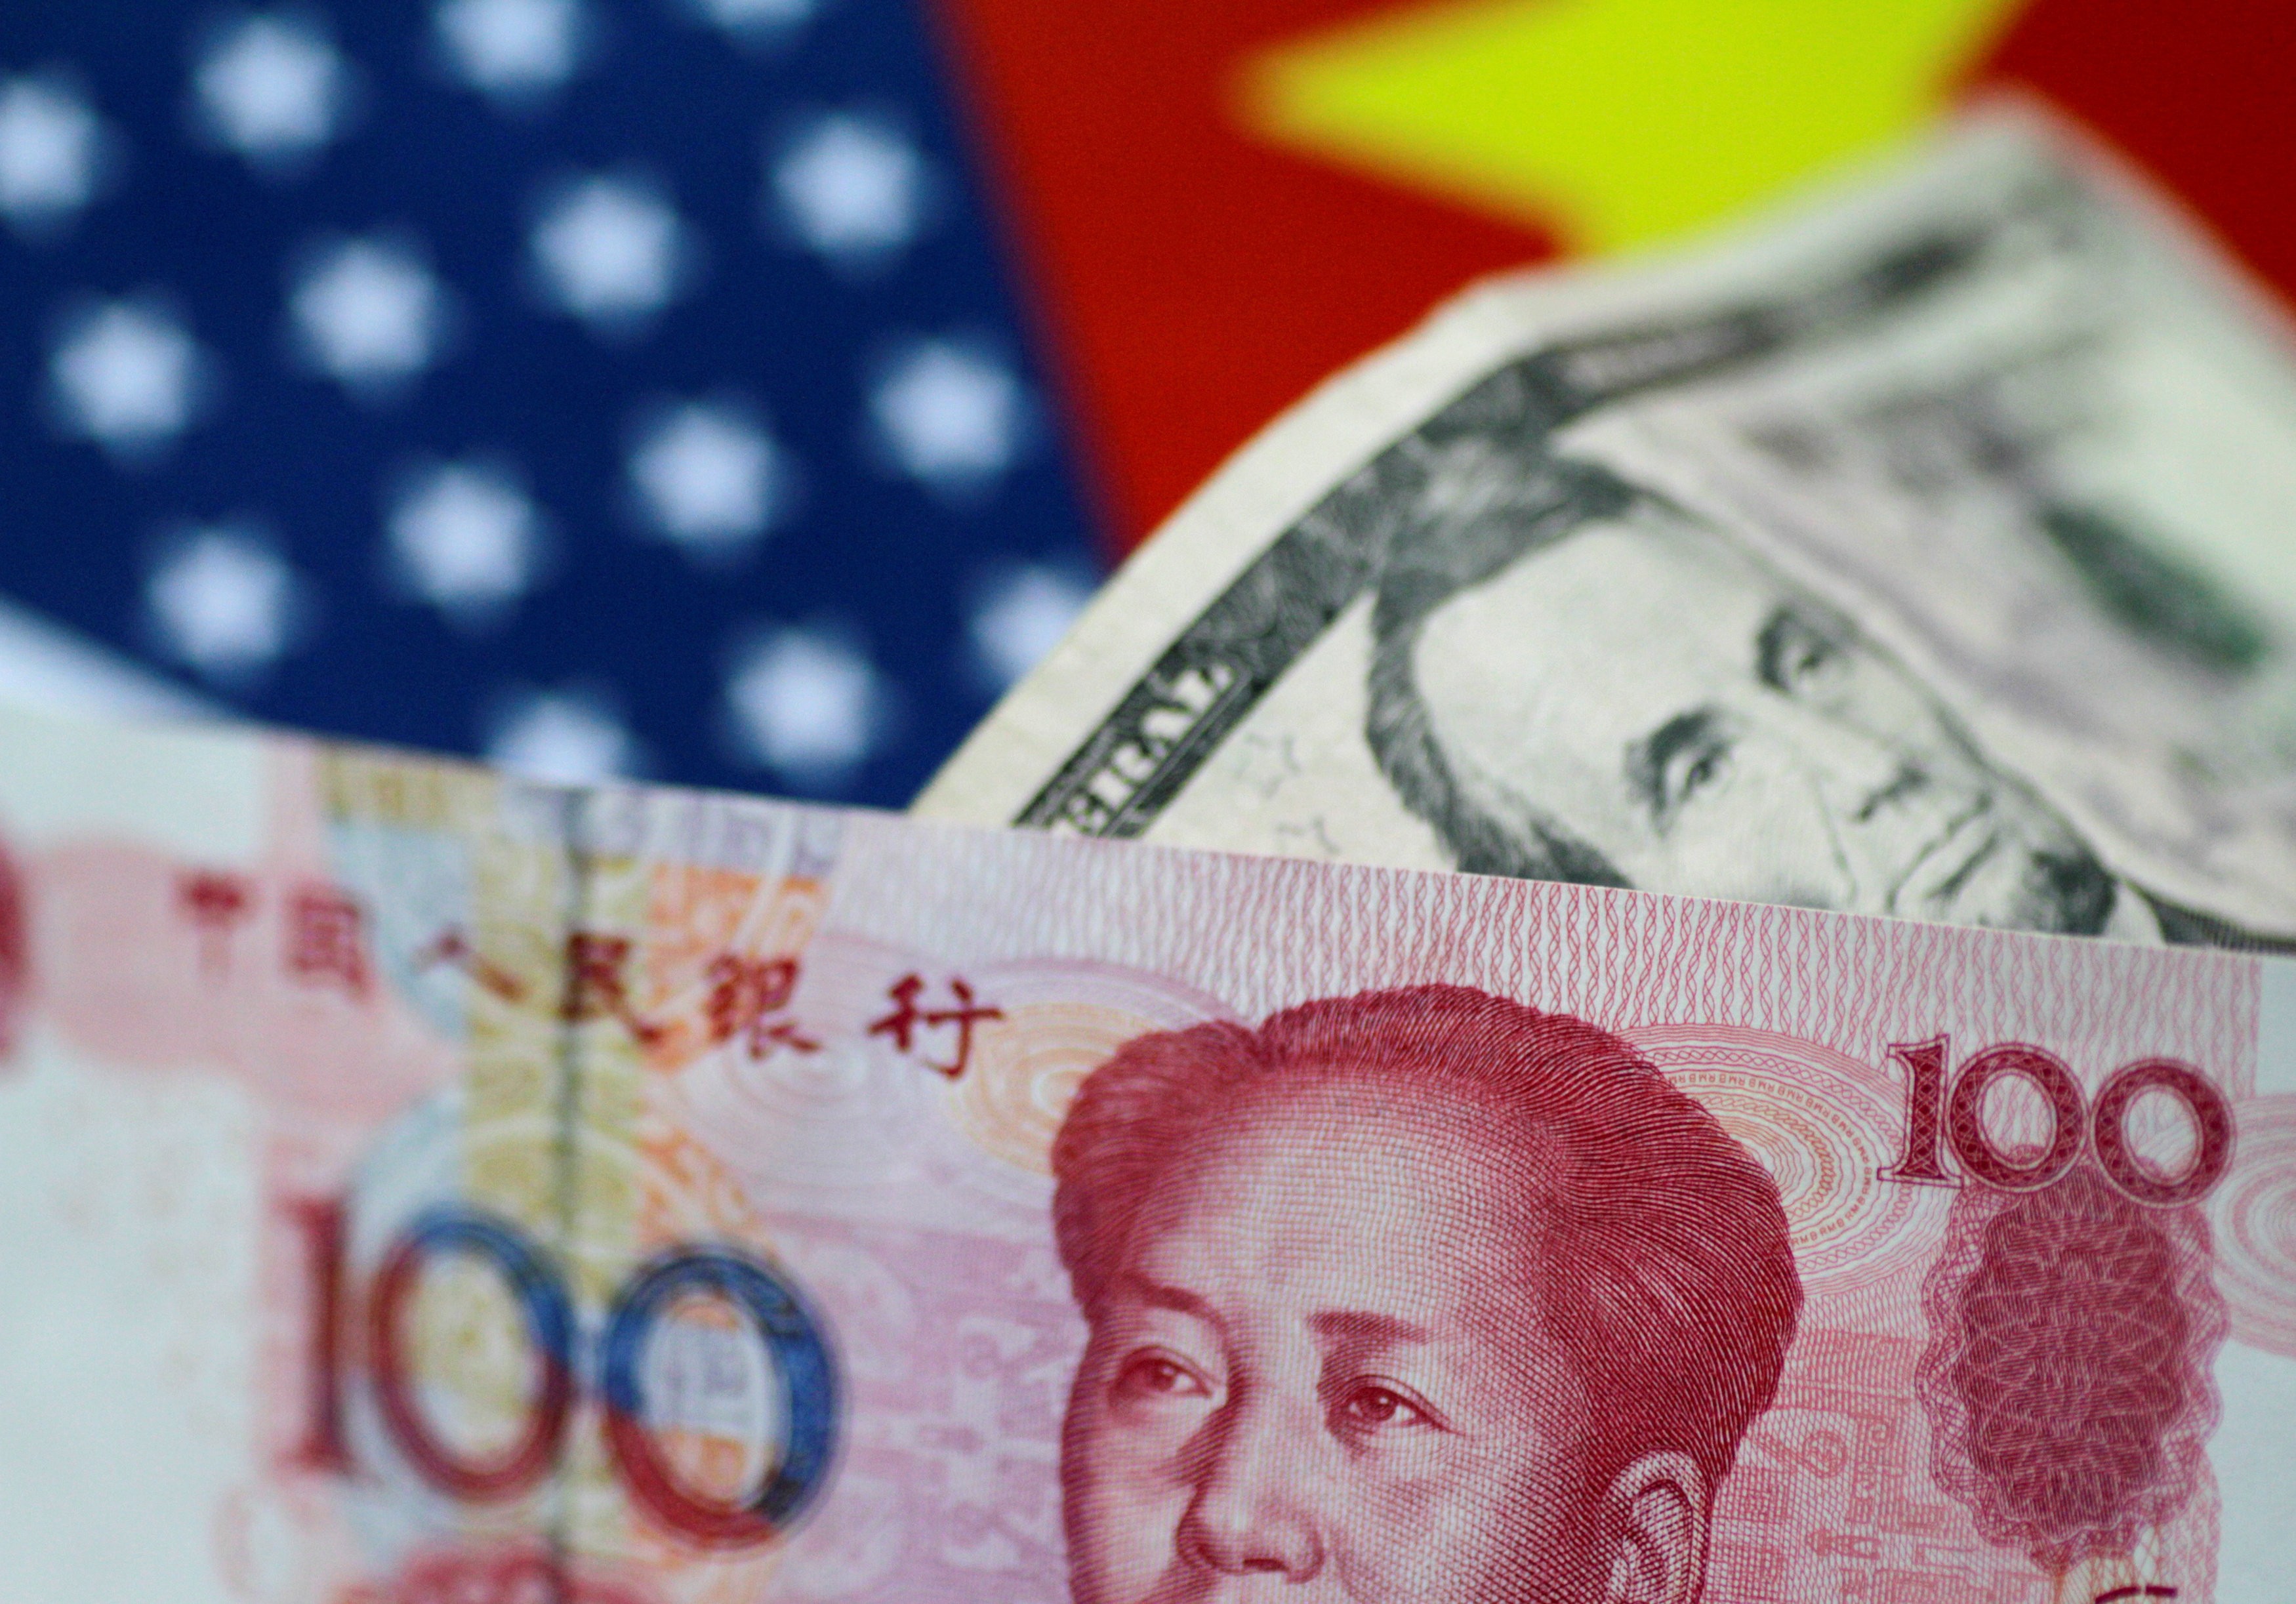 The yuan has been losing in value against the US dollar for seven consecutive sessions. Photo: Reuters